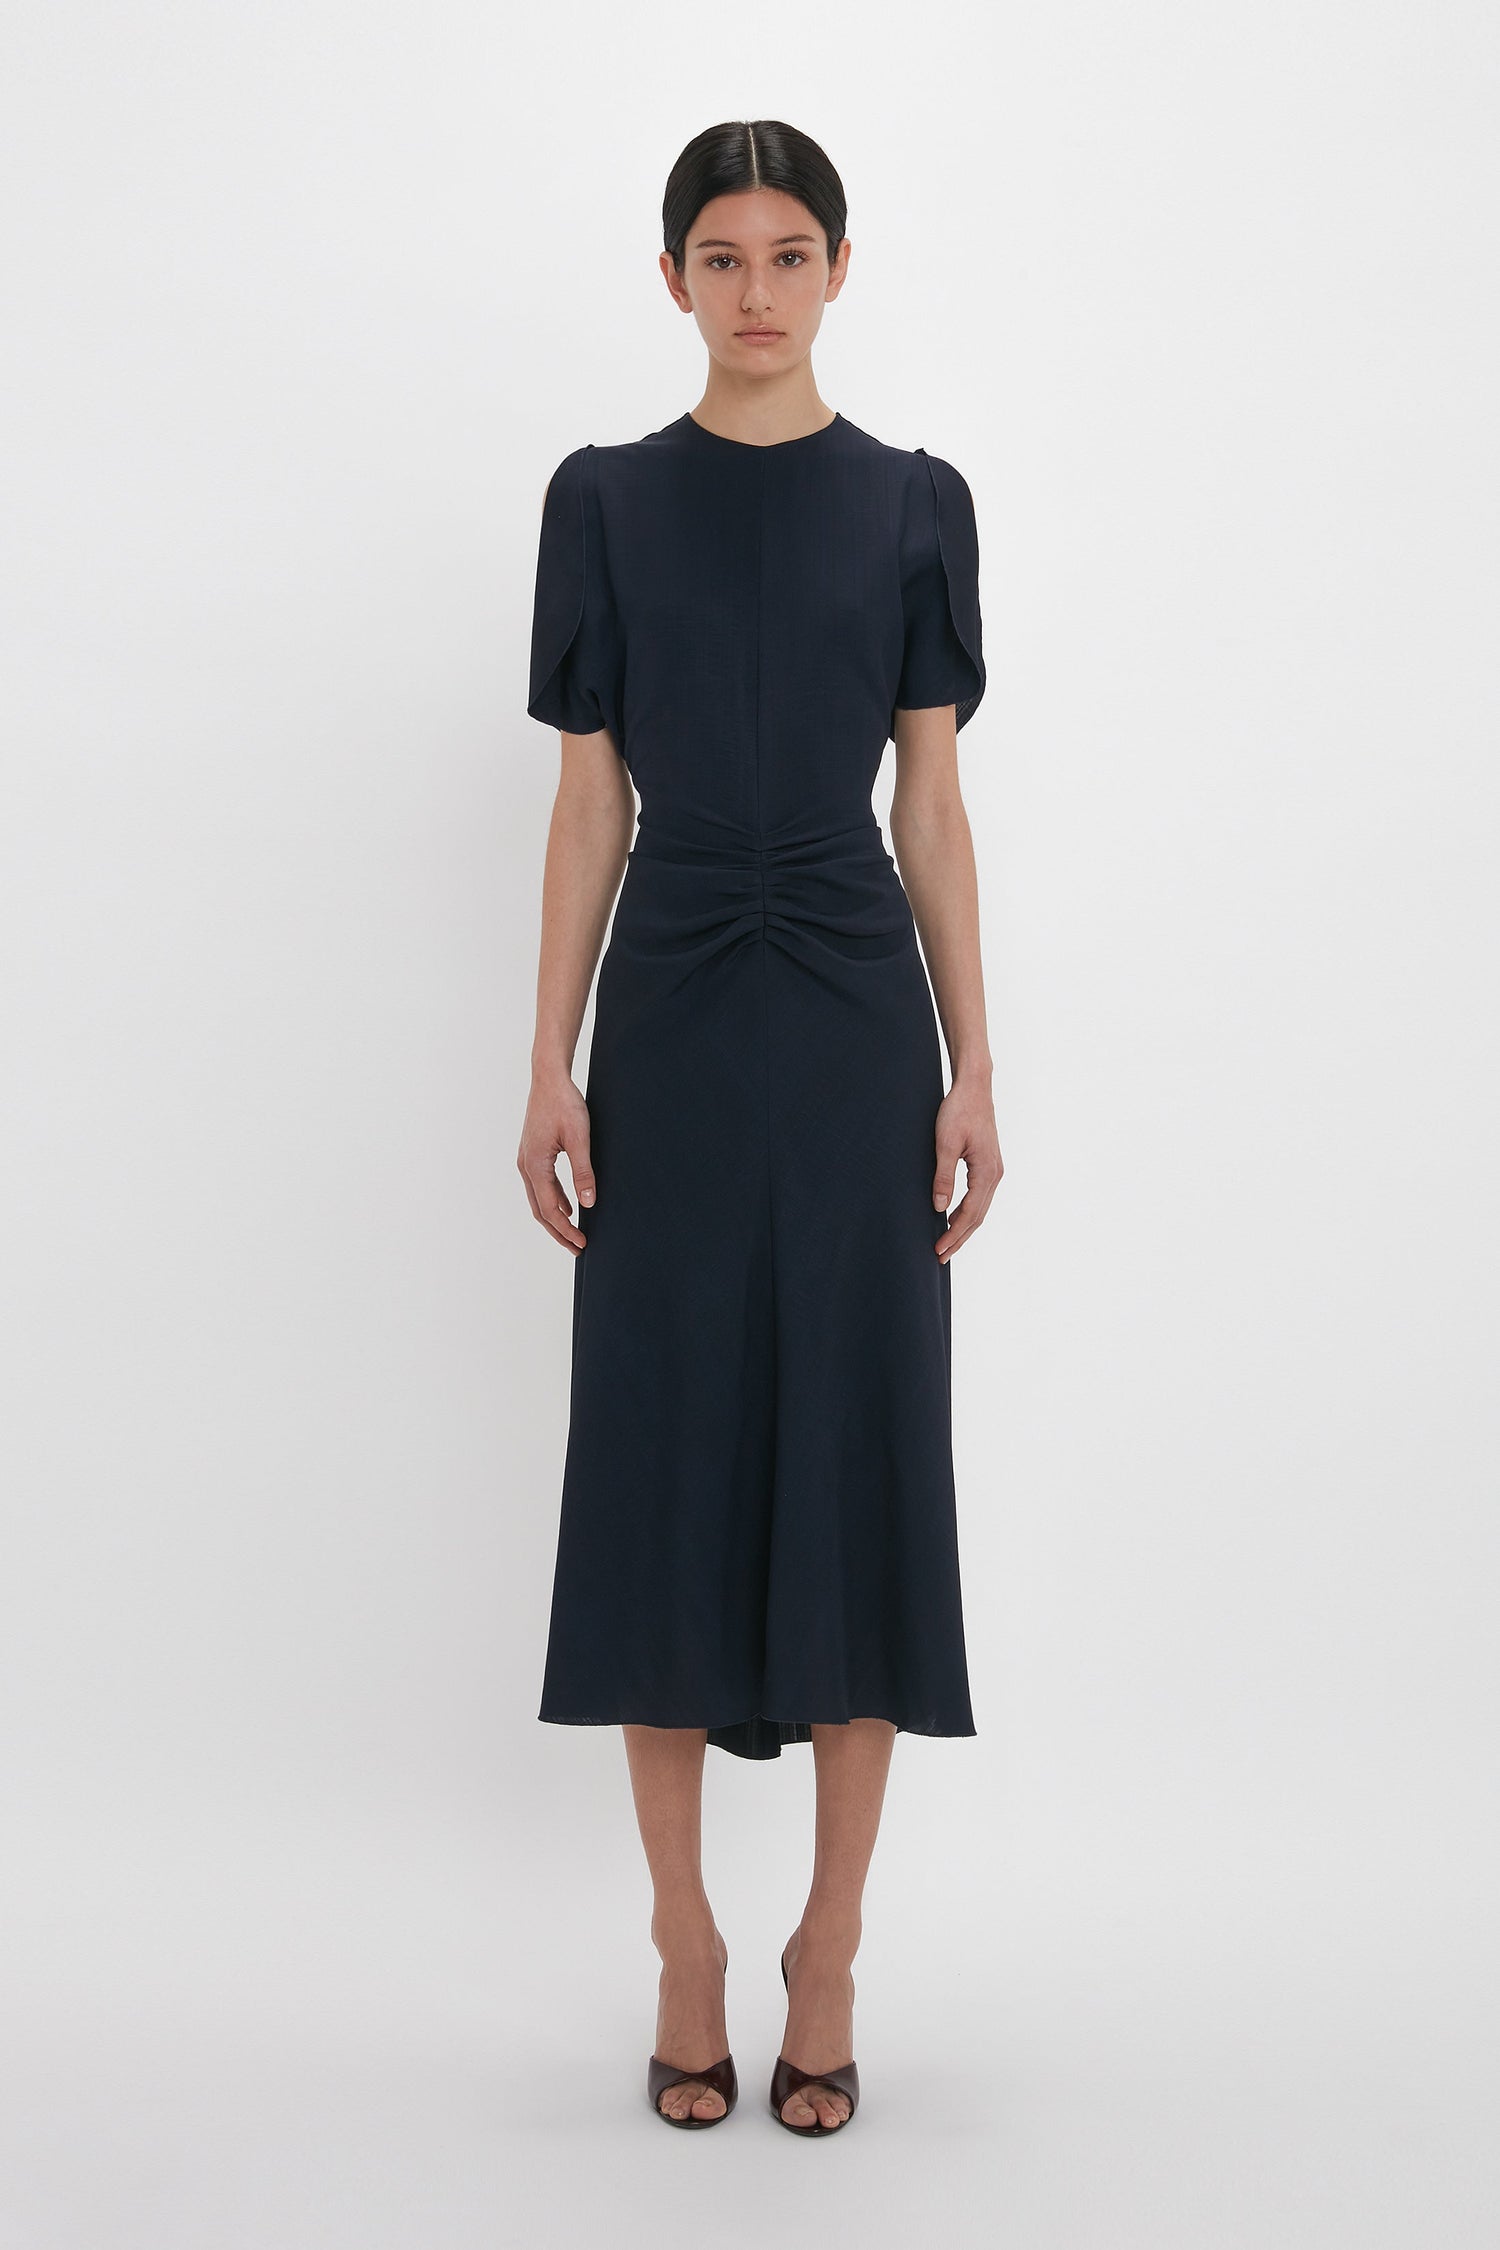 A woman stands against a plain white background, wearing the Gathered V-Neck Midi Dress In Midnight by Victoria Beckham, paired with brown open-toe heels.